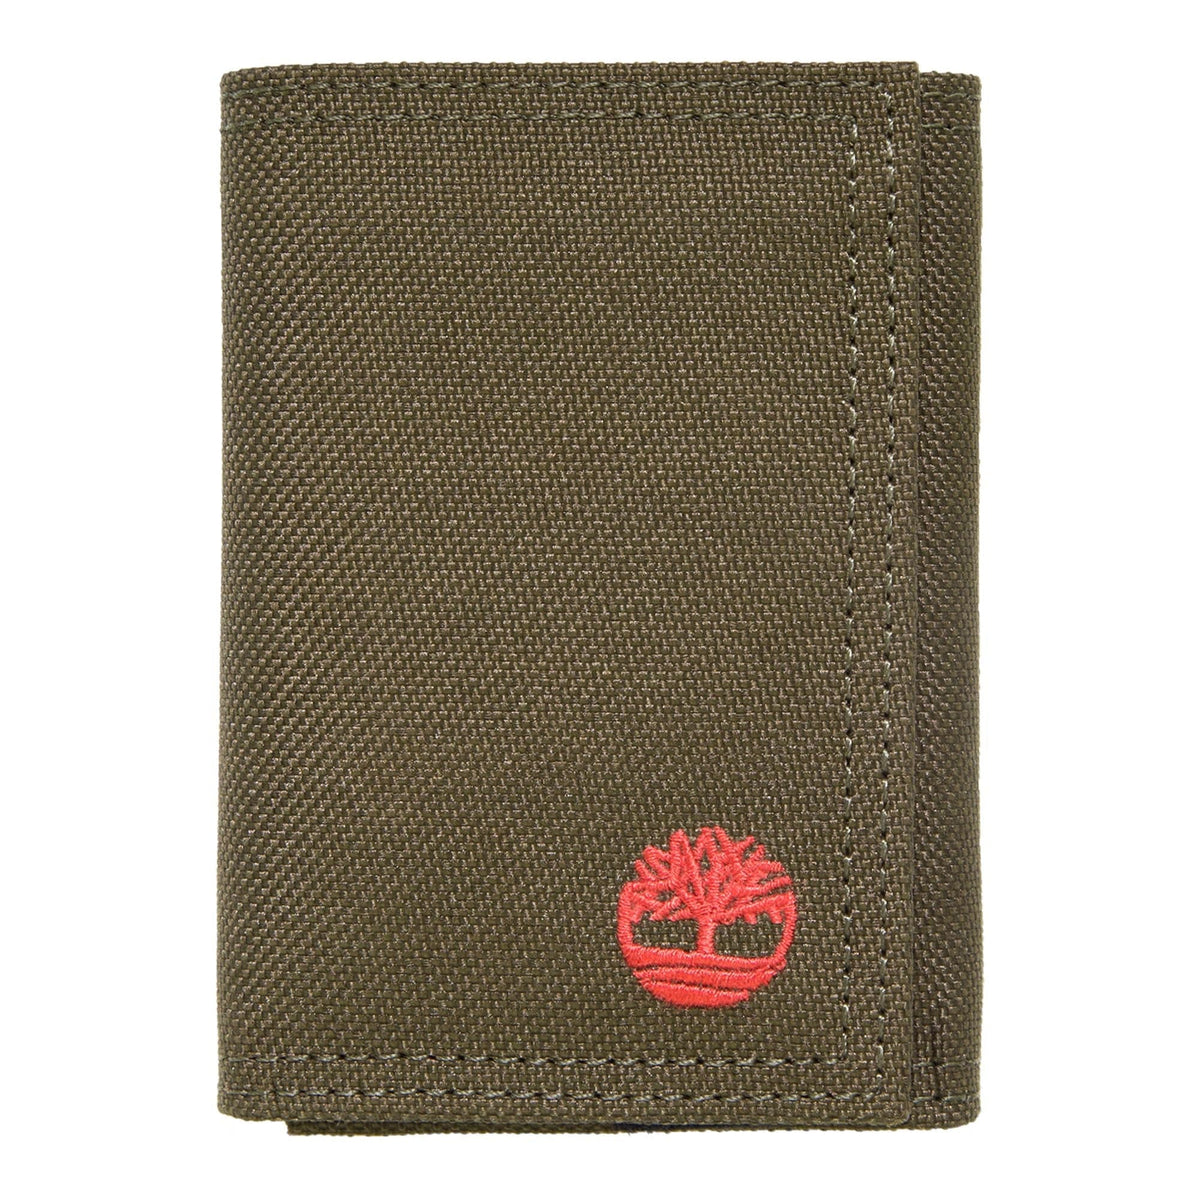 Timberland Nylon Embroidered Trifold Wallet